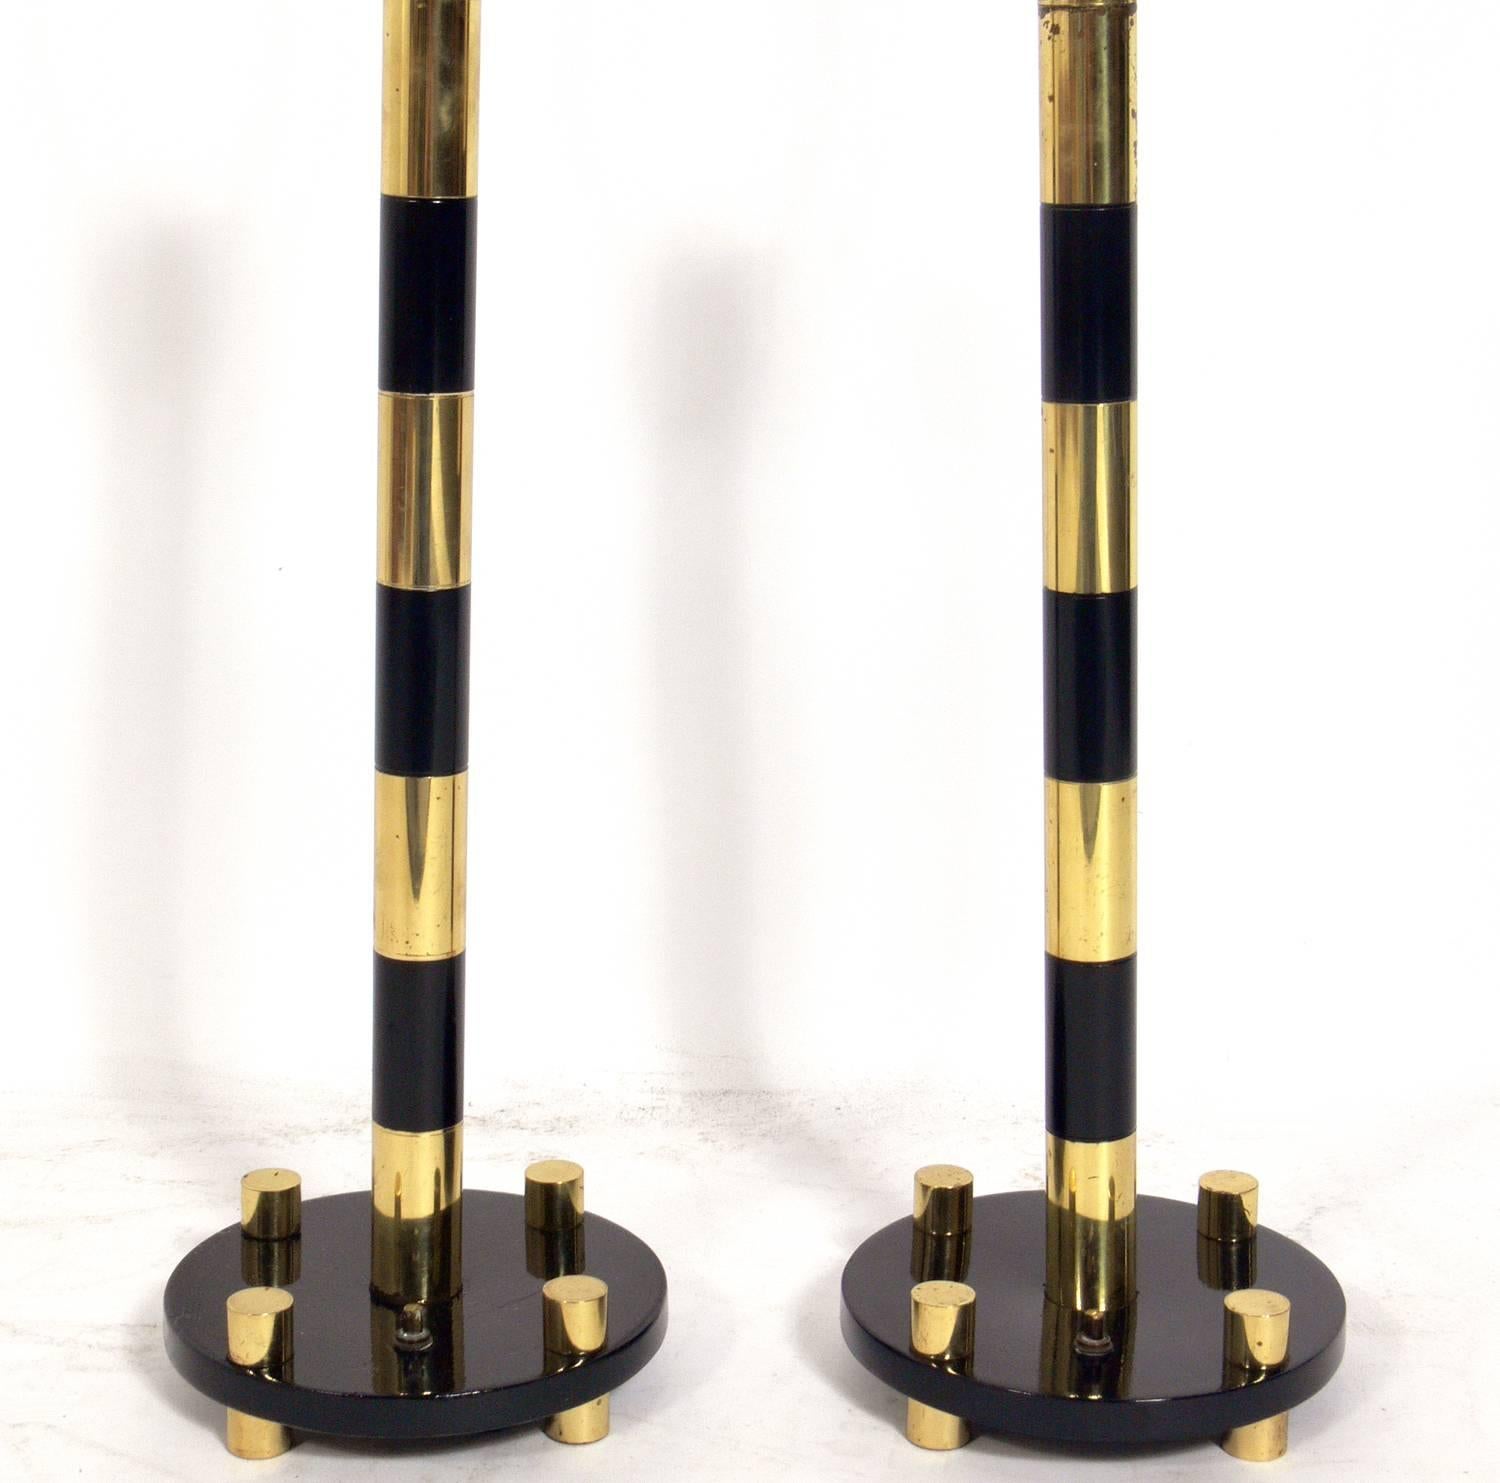 Elegant brass and black lamps, in the manner of Tommi Parzinger, American, circa 1950s. They have been rewired and are ready to use. The price noted below includes the shades.